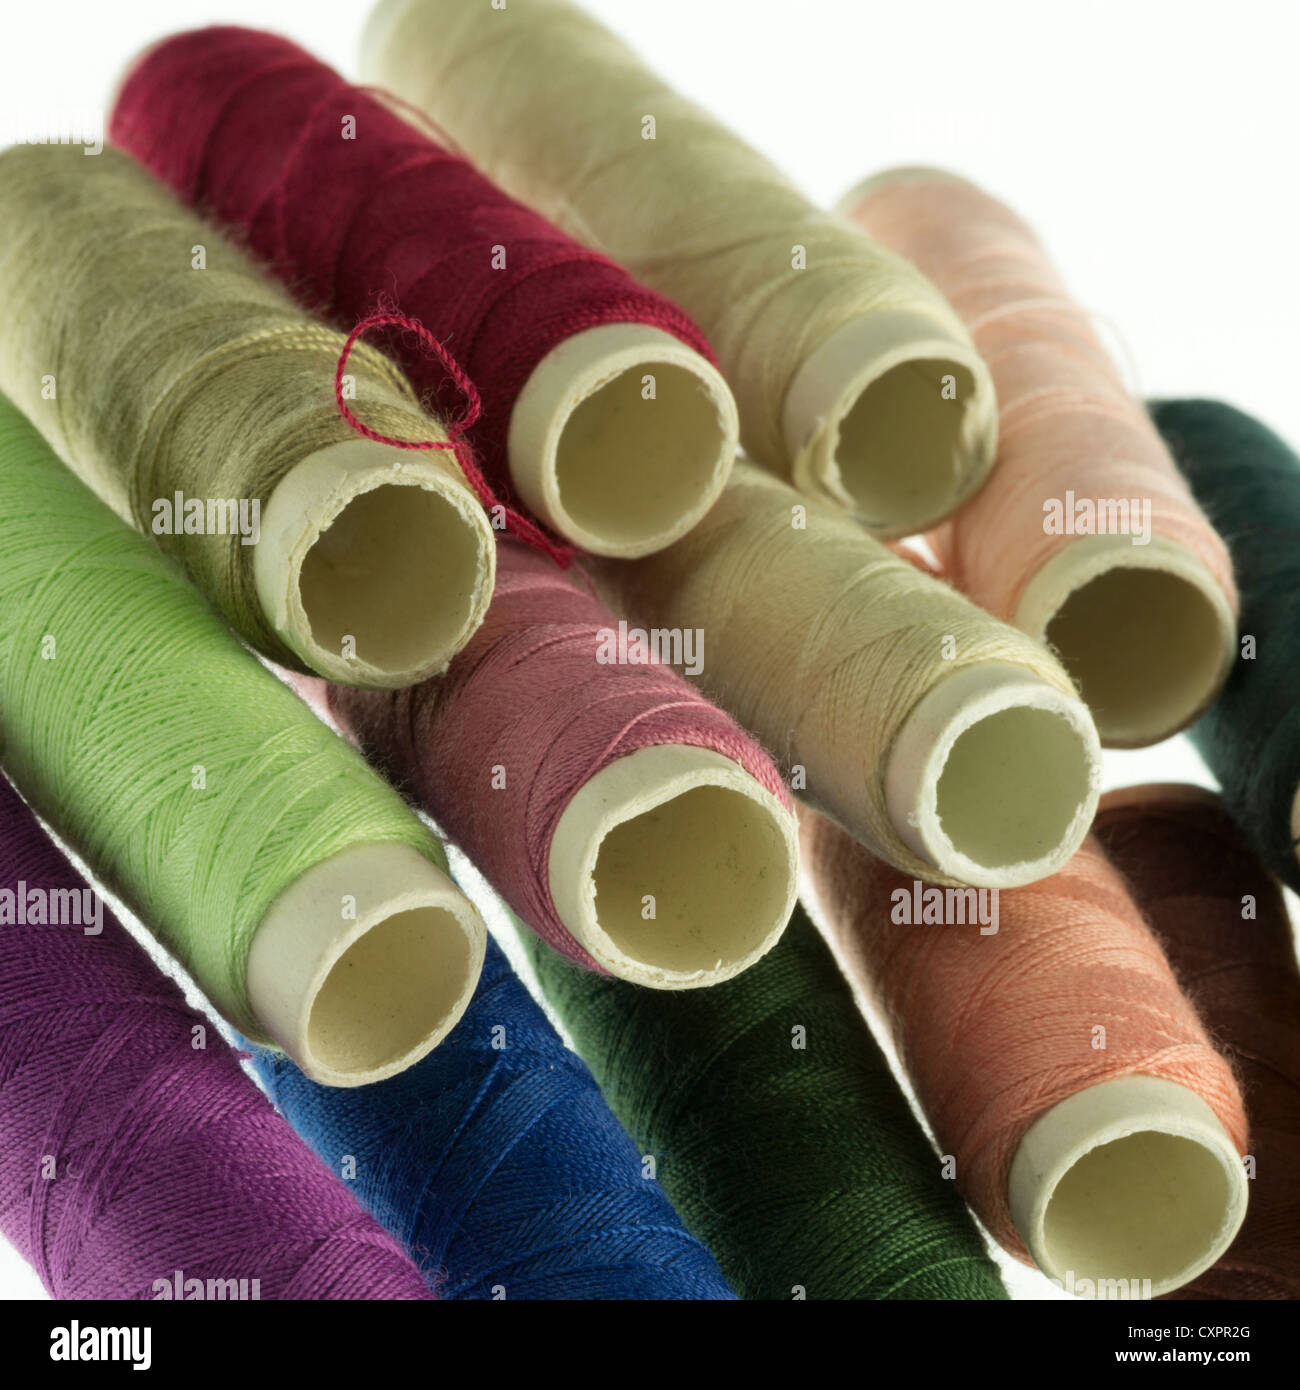 Pile of reels of coloured polyester thread Stock Photo